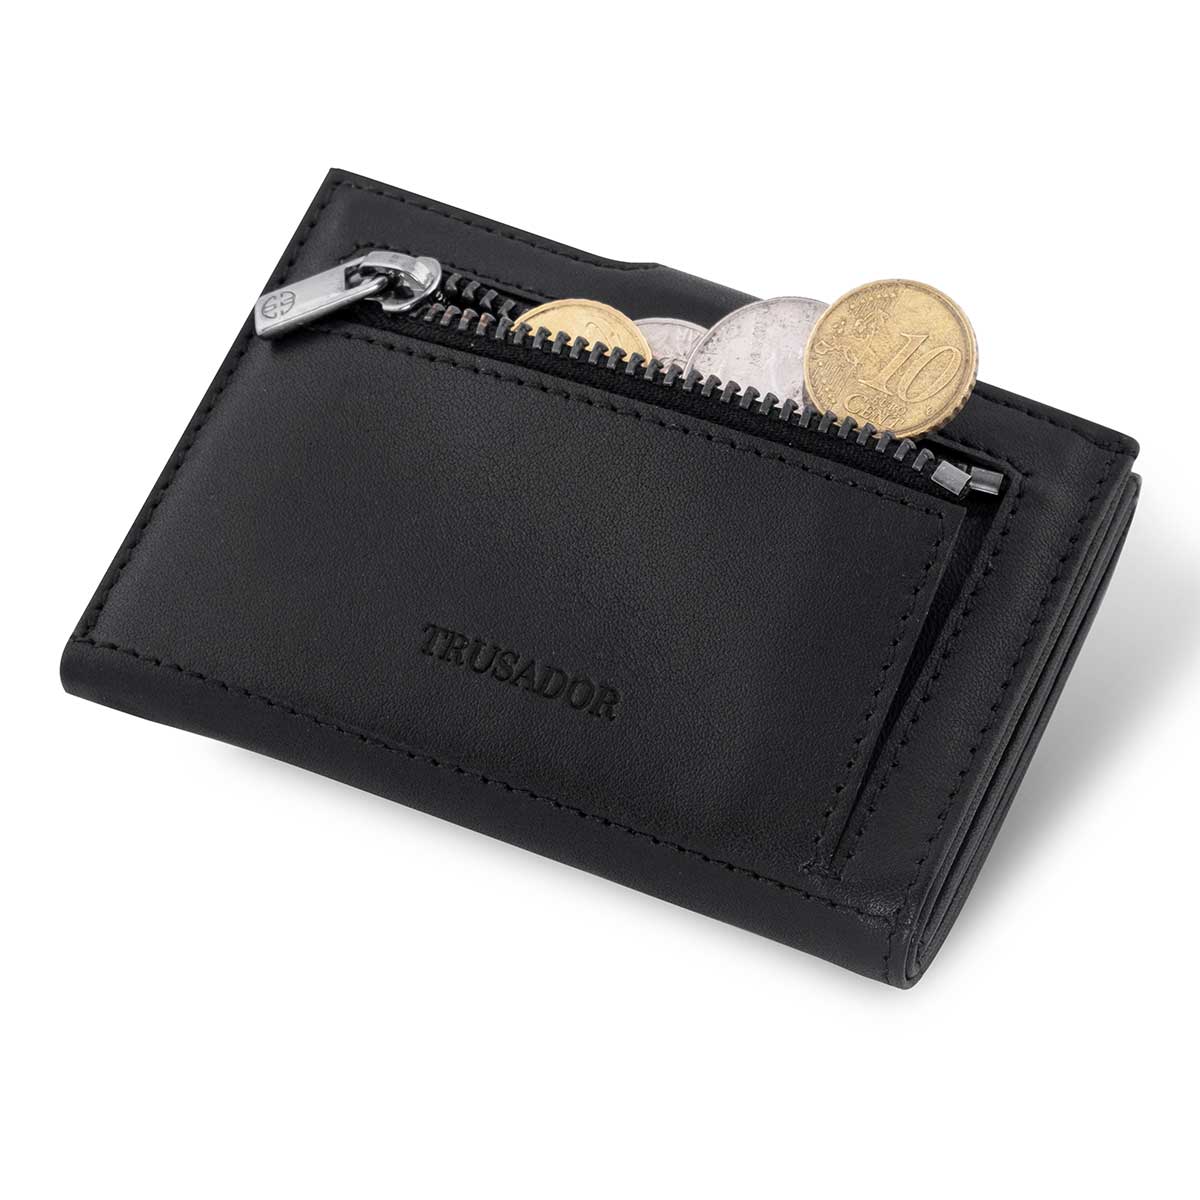 Trusador Savona Classic Men's Wallets Leather Bifold with RFID Wallet Black